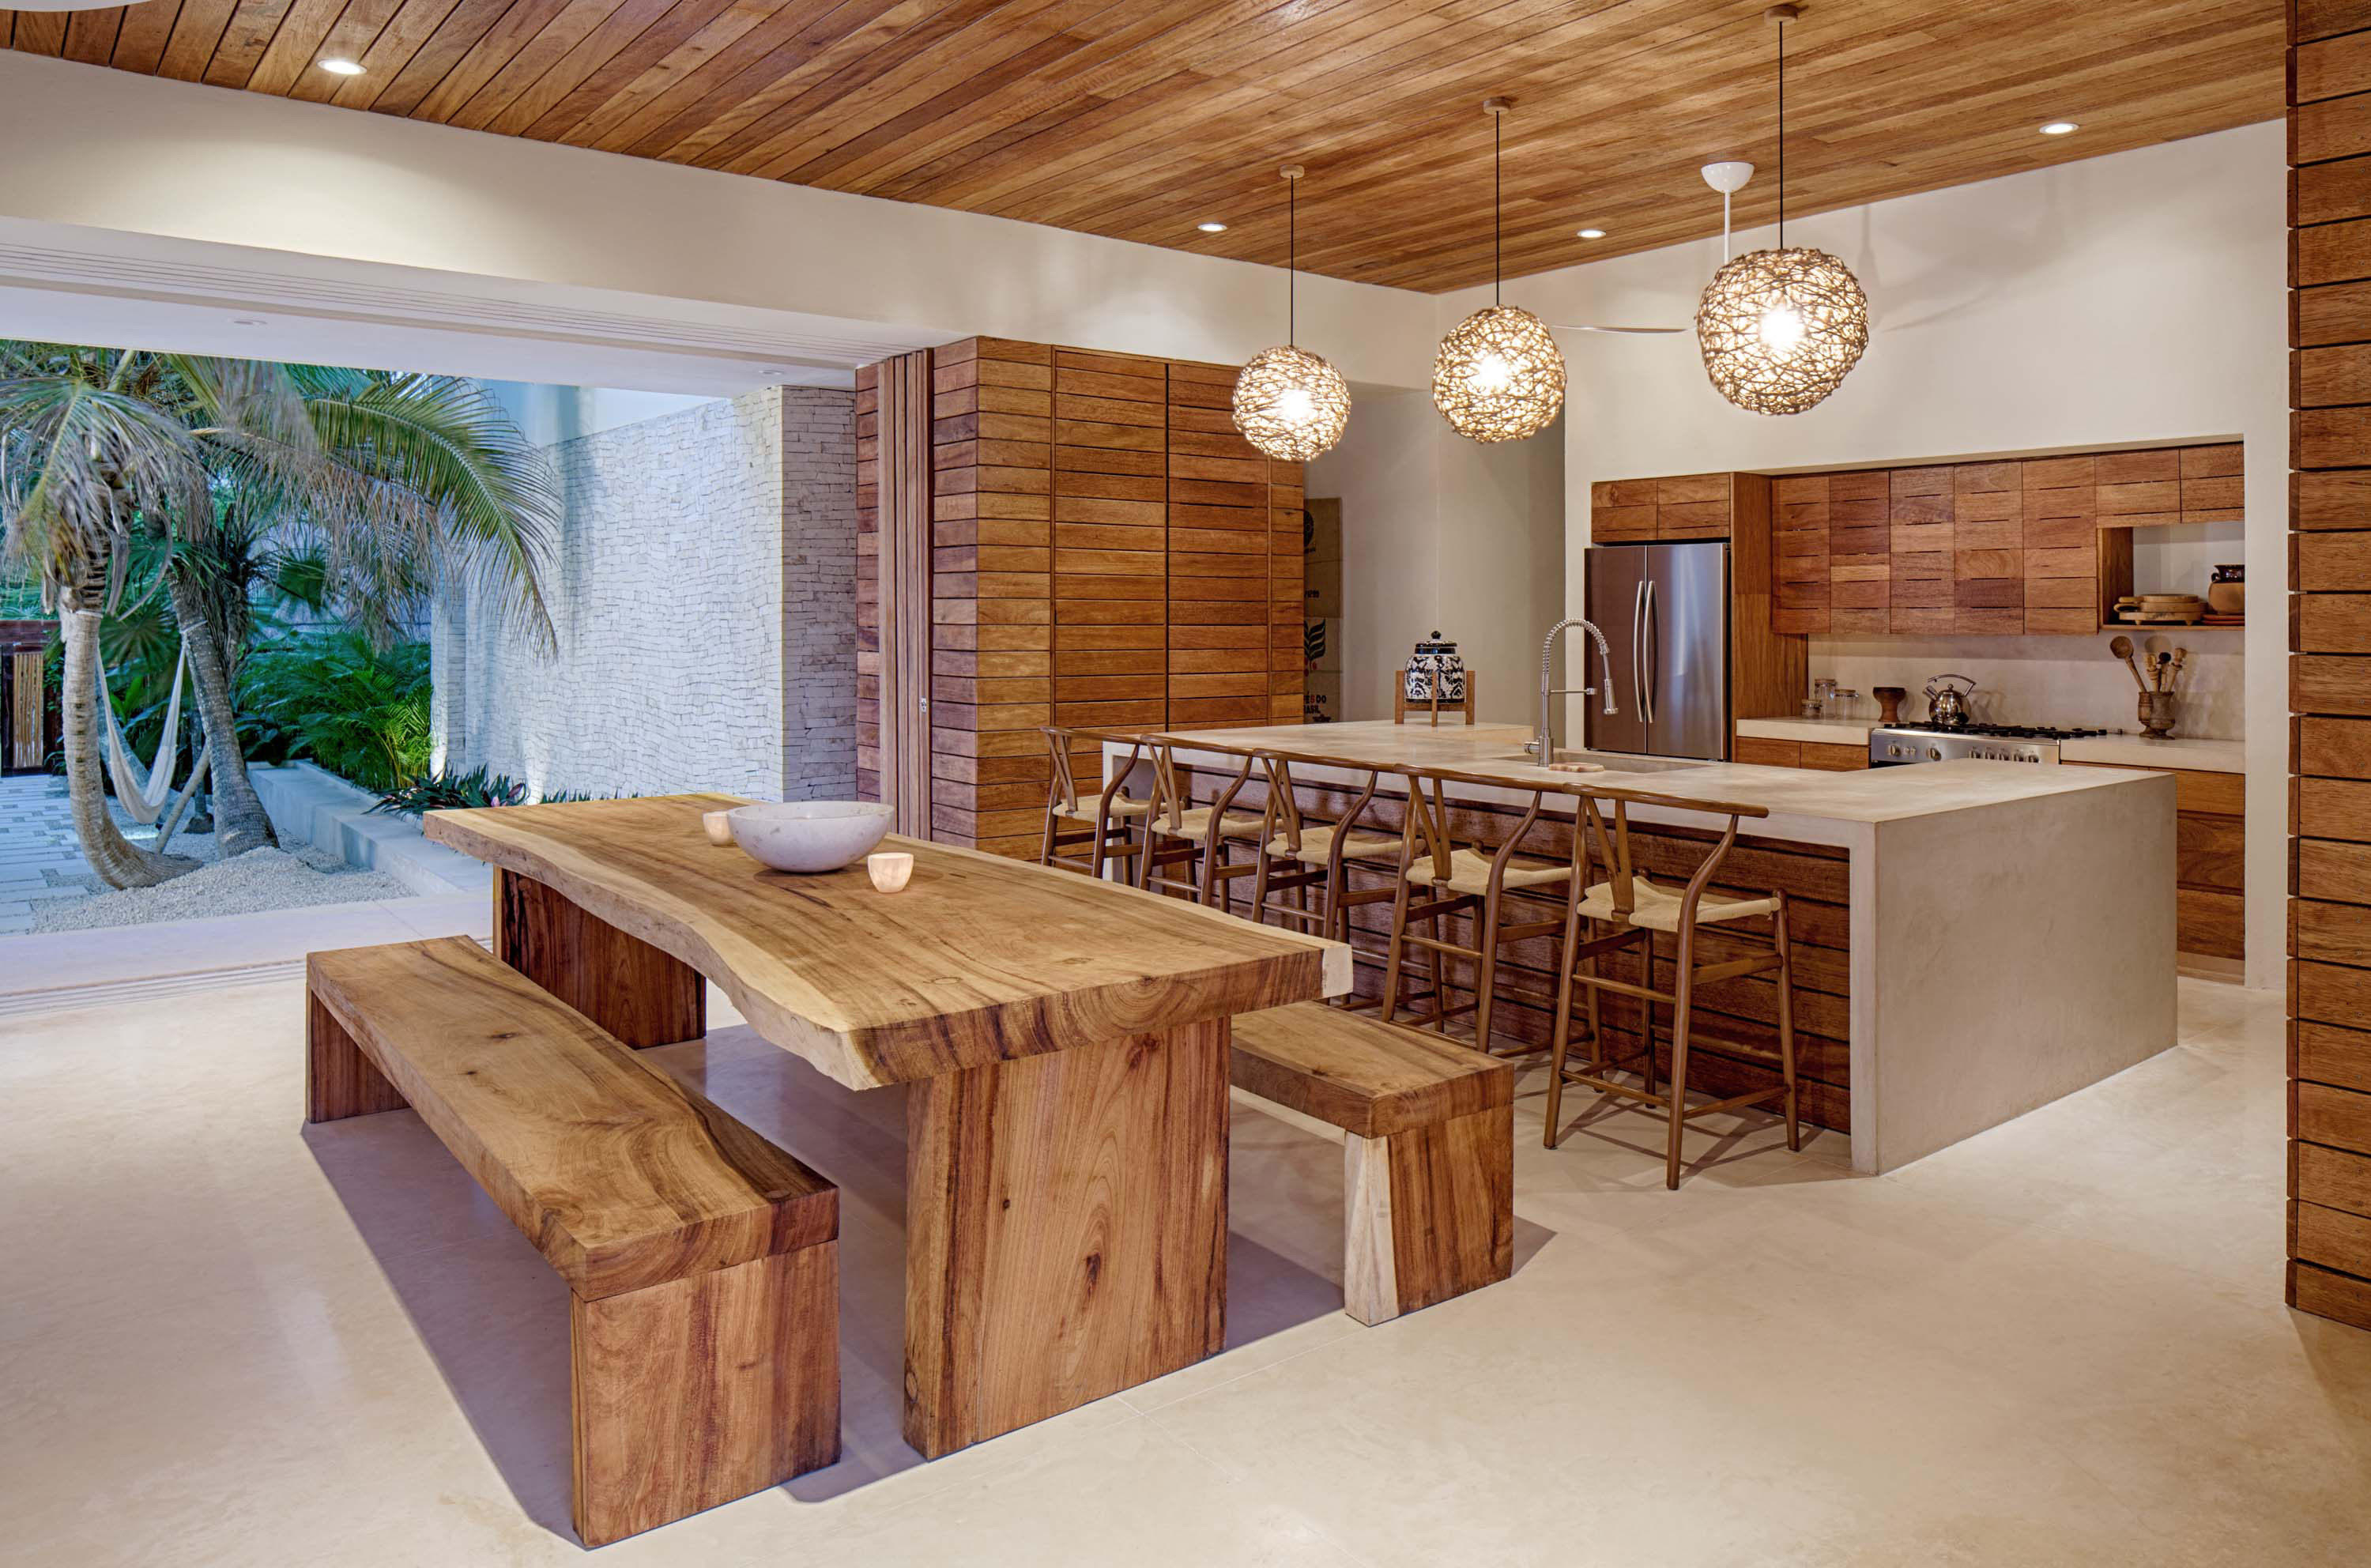 Interior photo of Casa Xixim by Specht Novak Architects. Shot by Taggart Sorensen, featuring an island kitchen with wooden accents and adjacent dining area.